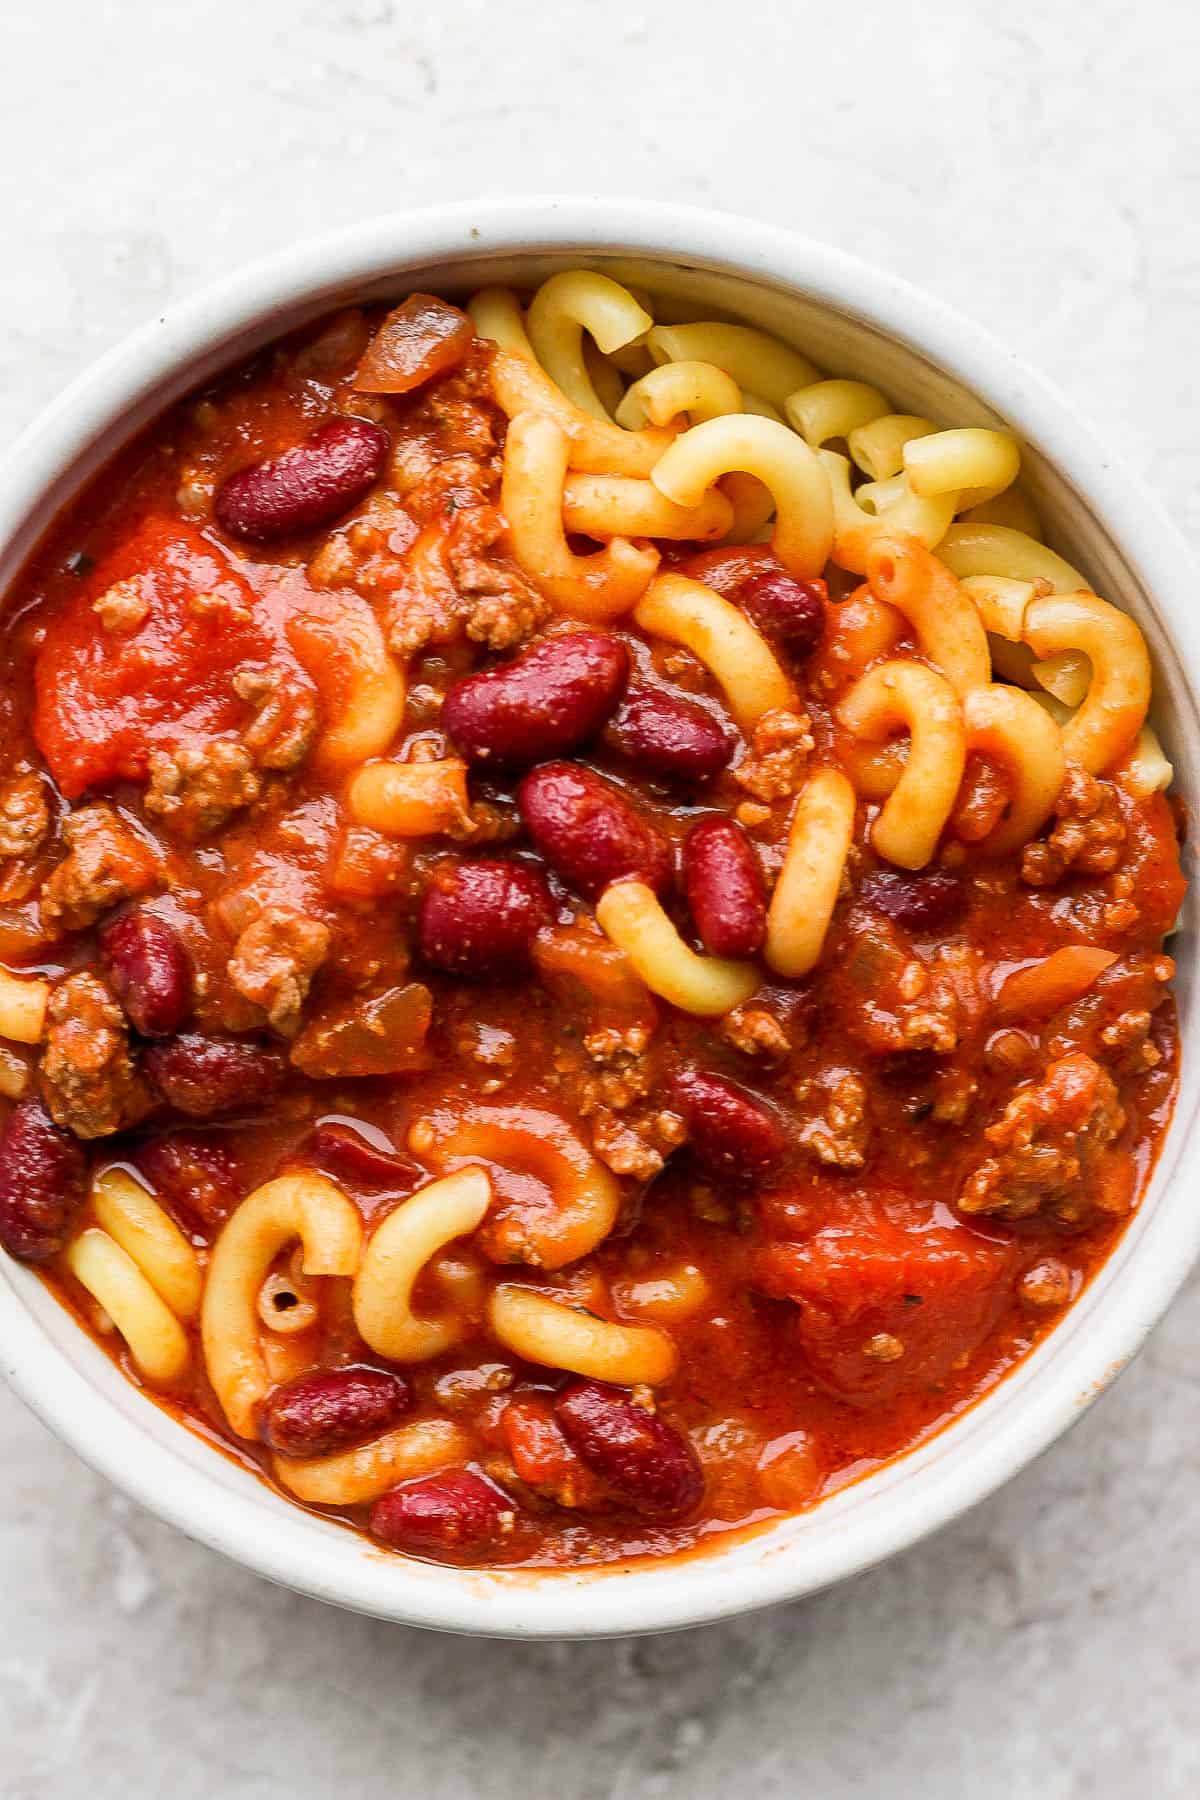 Goulash in a bowl with elbow macaroni noodles.